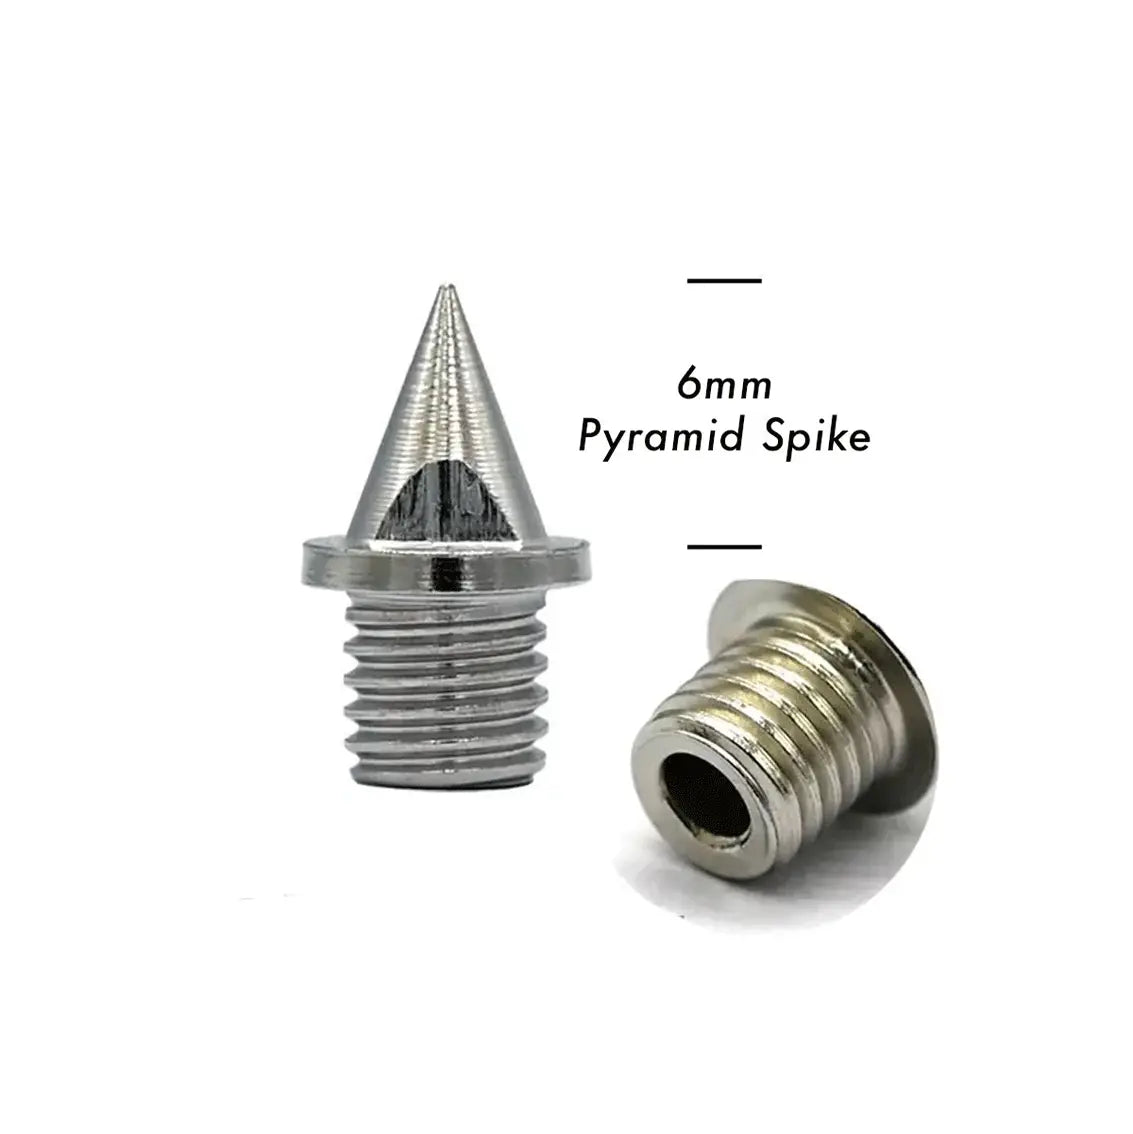 FKT - 6mm Pyramid Spikes / 20x pack including wrench